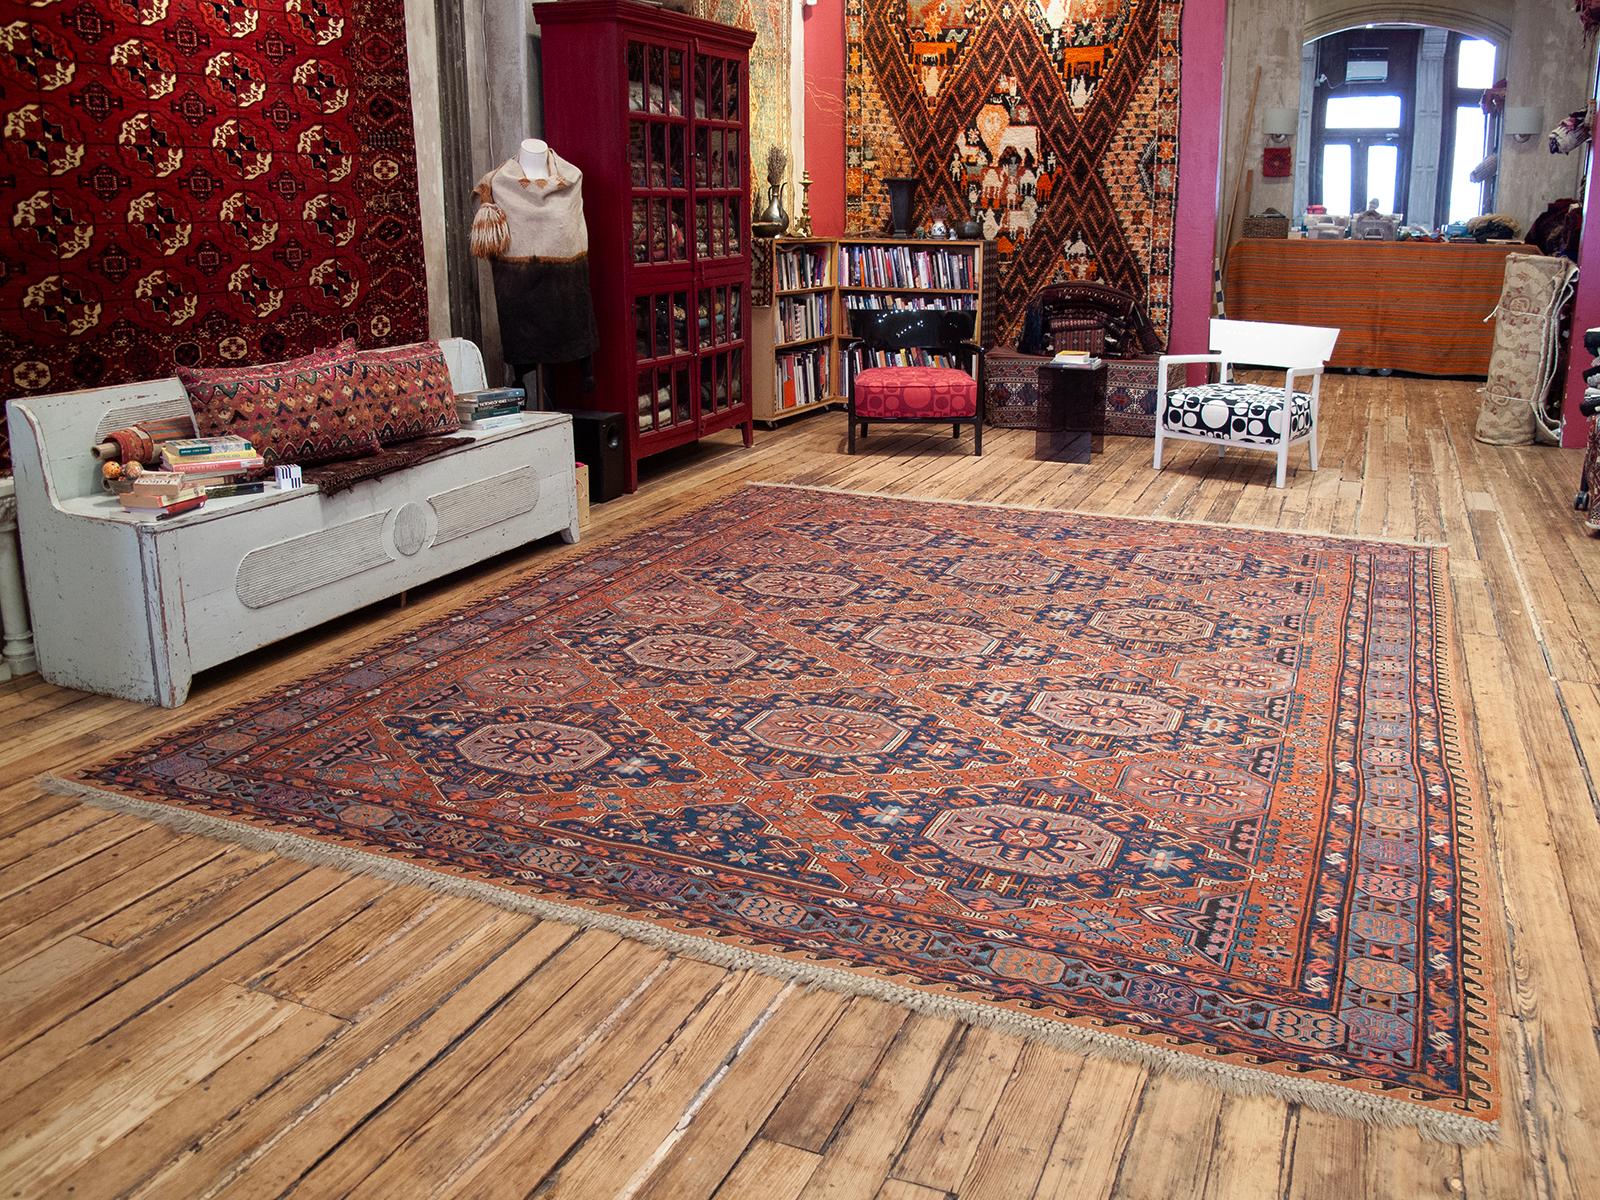 An antique flatwoven carpet from the Caucasus, in rare large format, woven in the intricate 